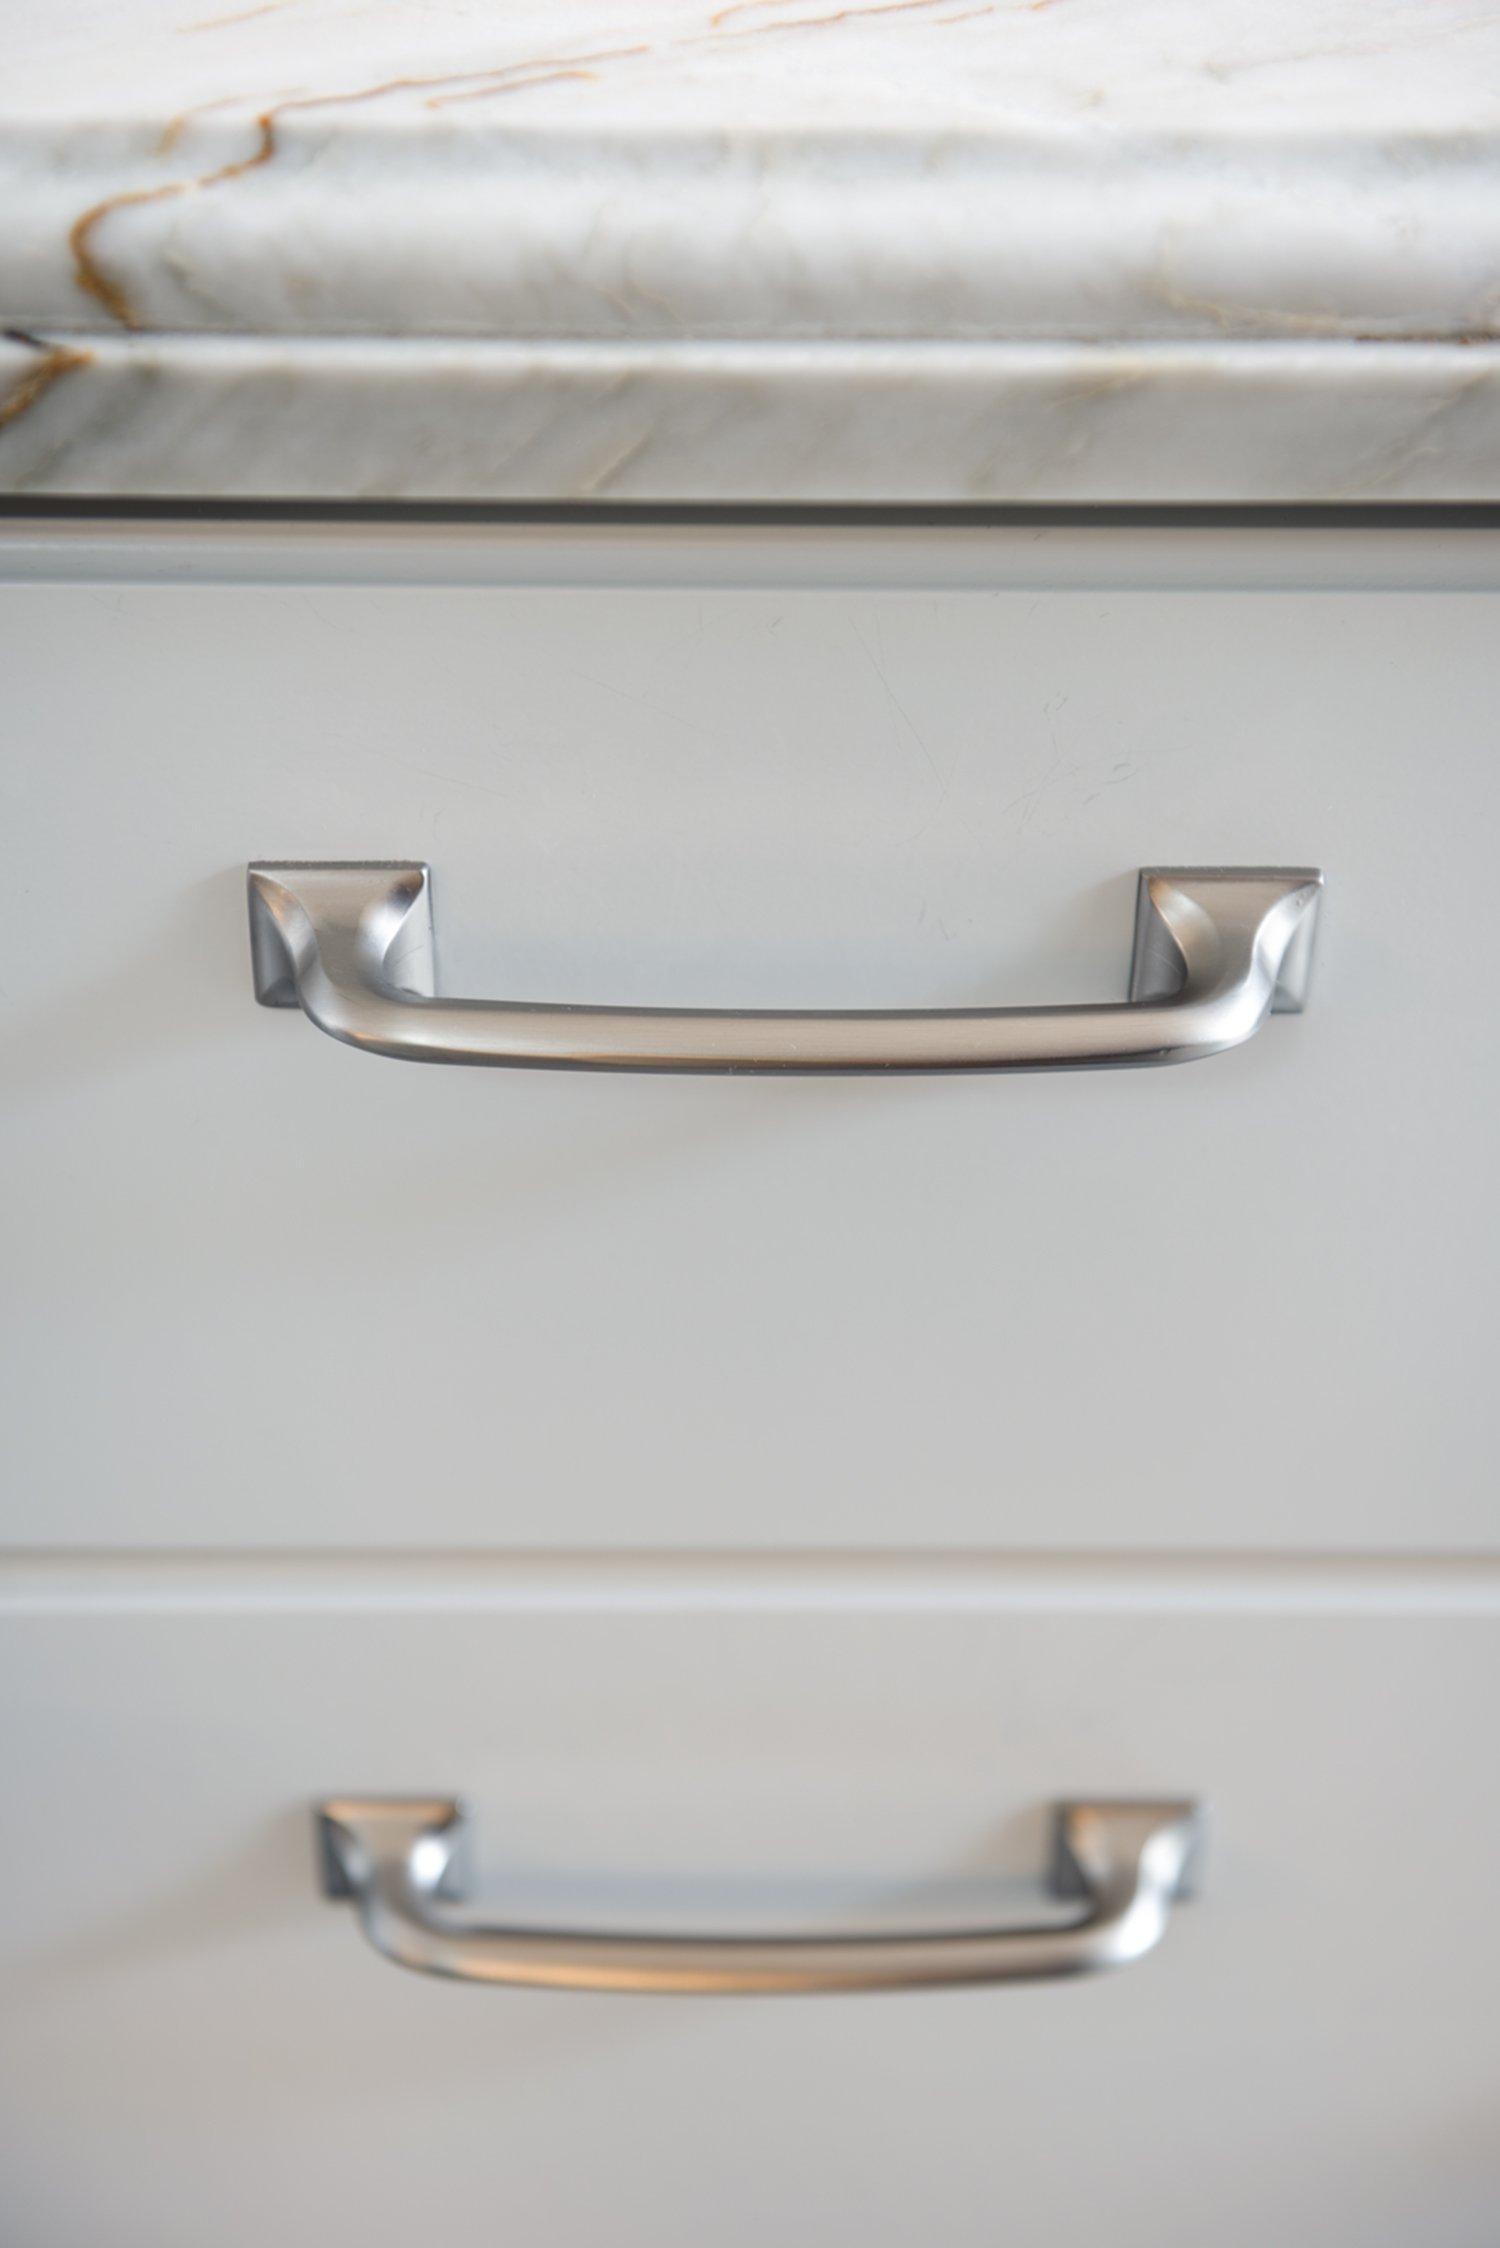  A close up of silver handle pulls.  